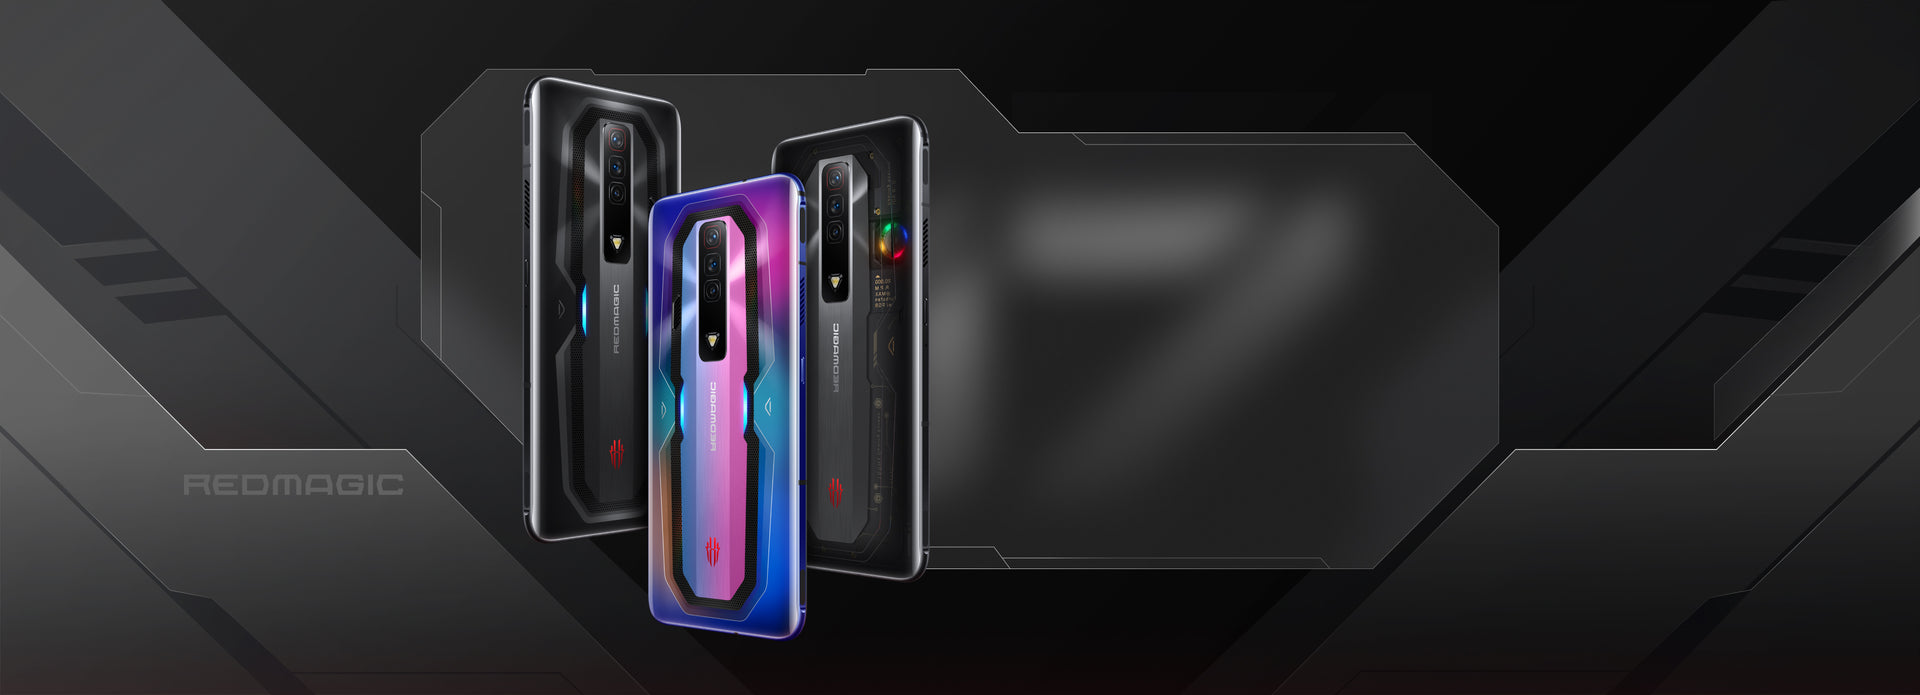 Red Magic 9 Pro official renders confirm slight design changes